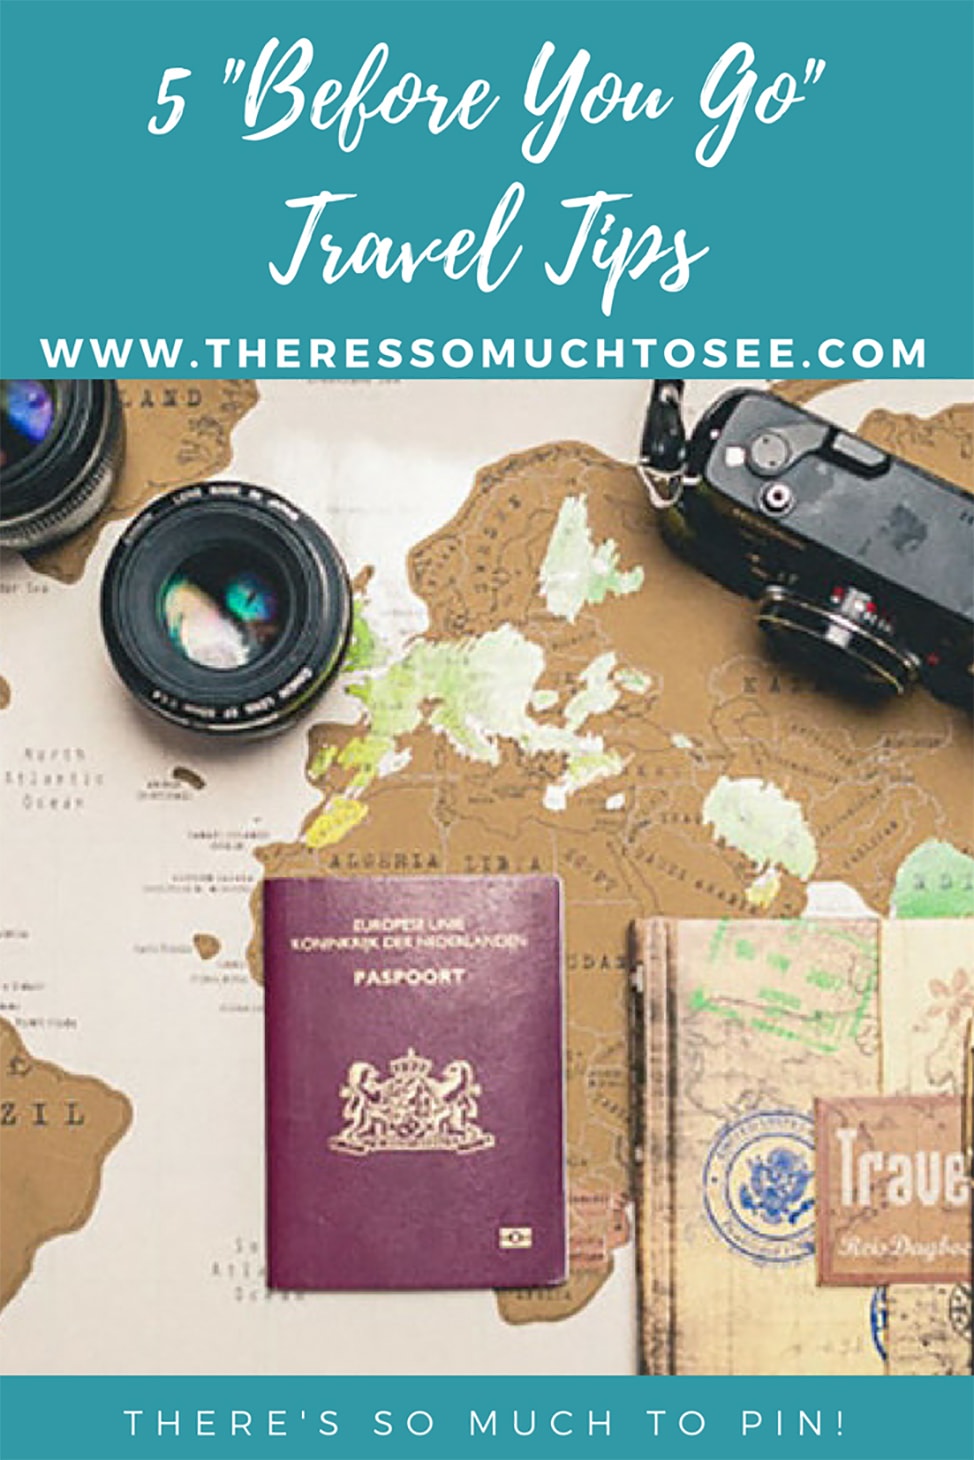 5 Before You Go Travel Tips - Theres So Much To See